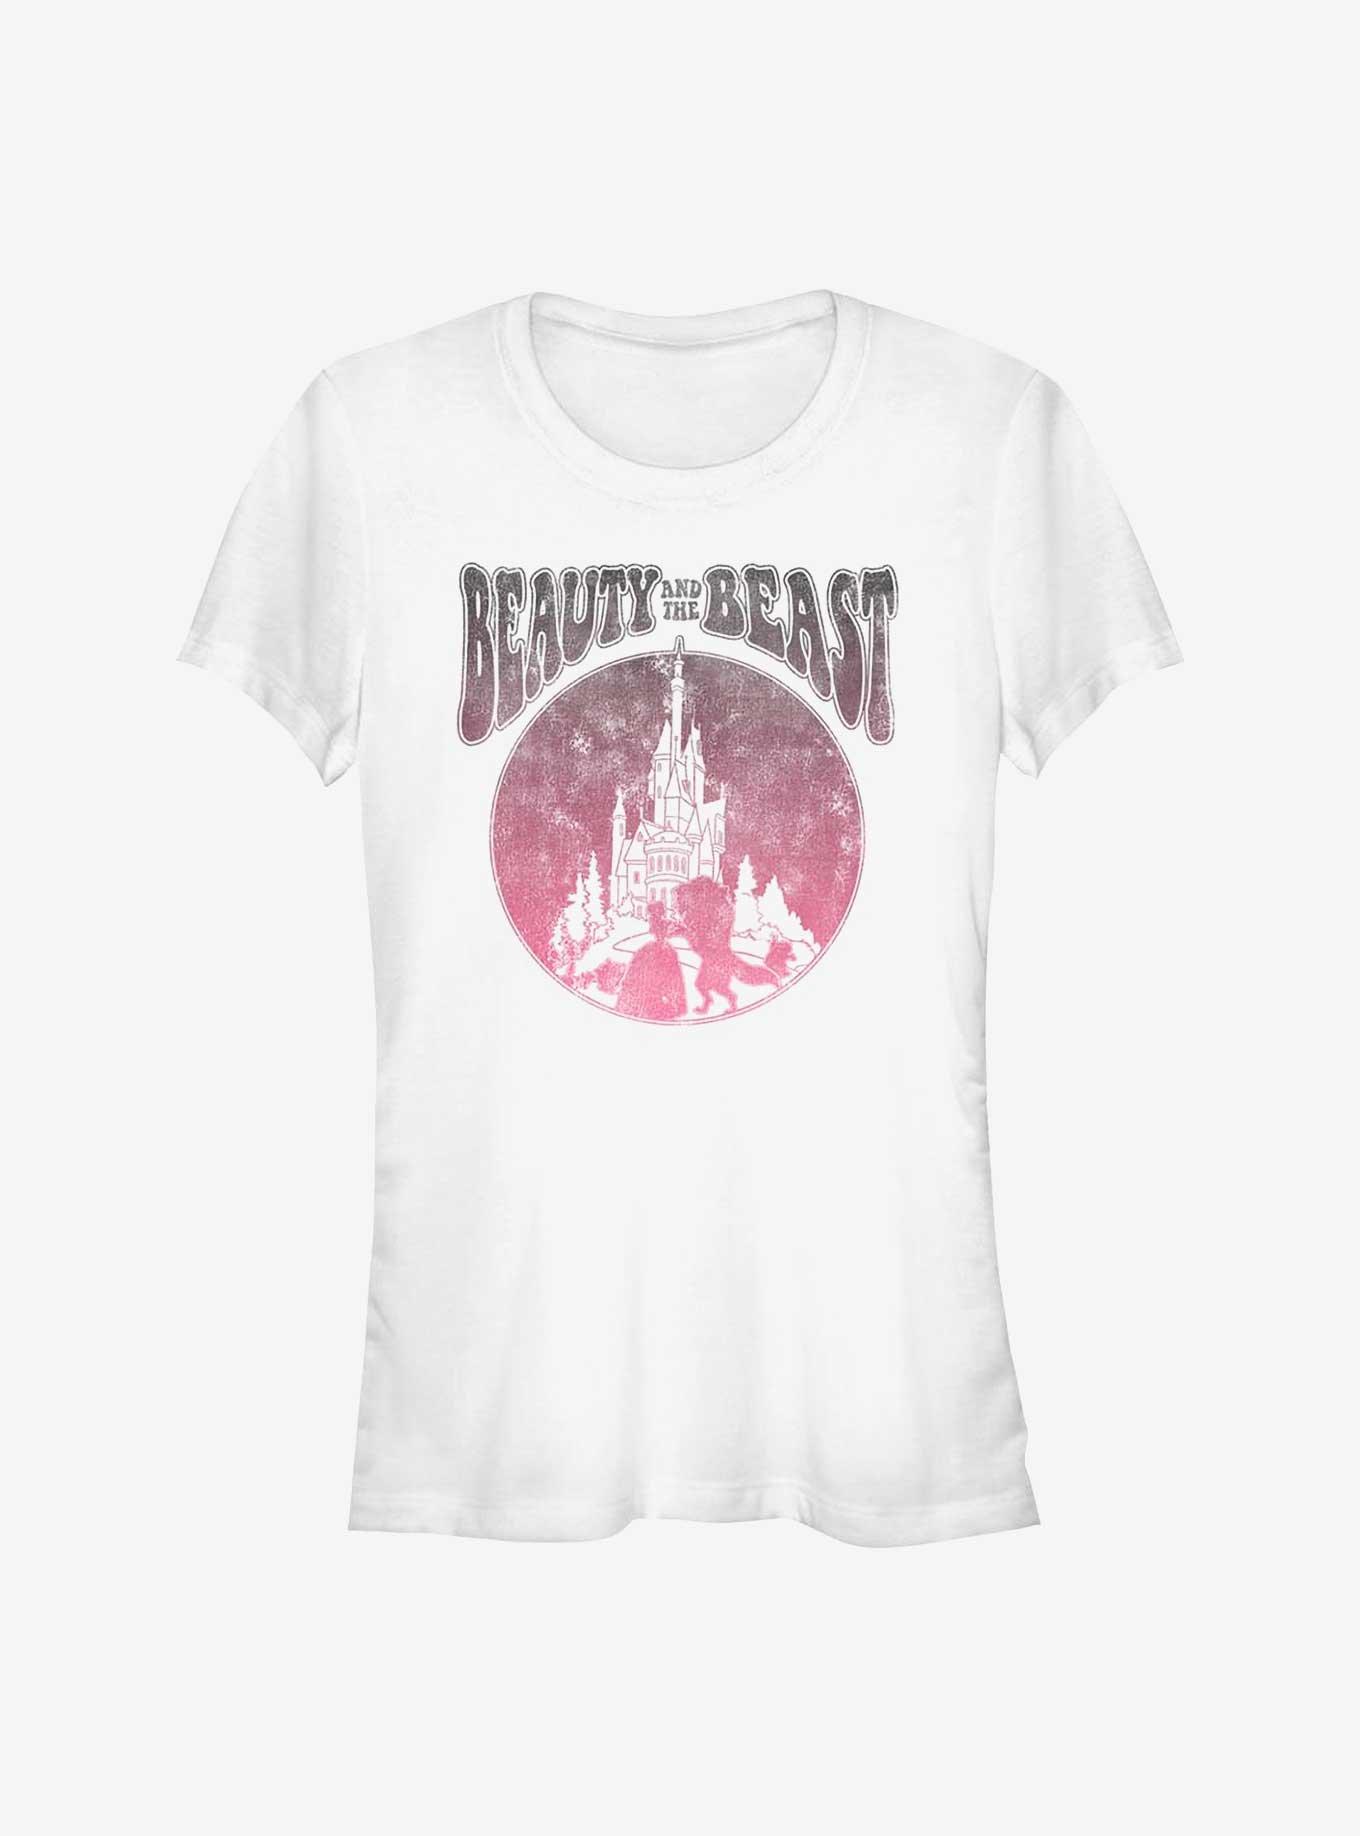 Hot Topic Disney Beauty and the Beast Castle Badge Girls T-Shirt